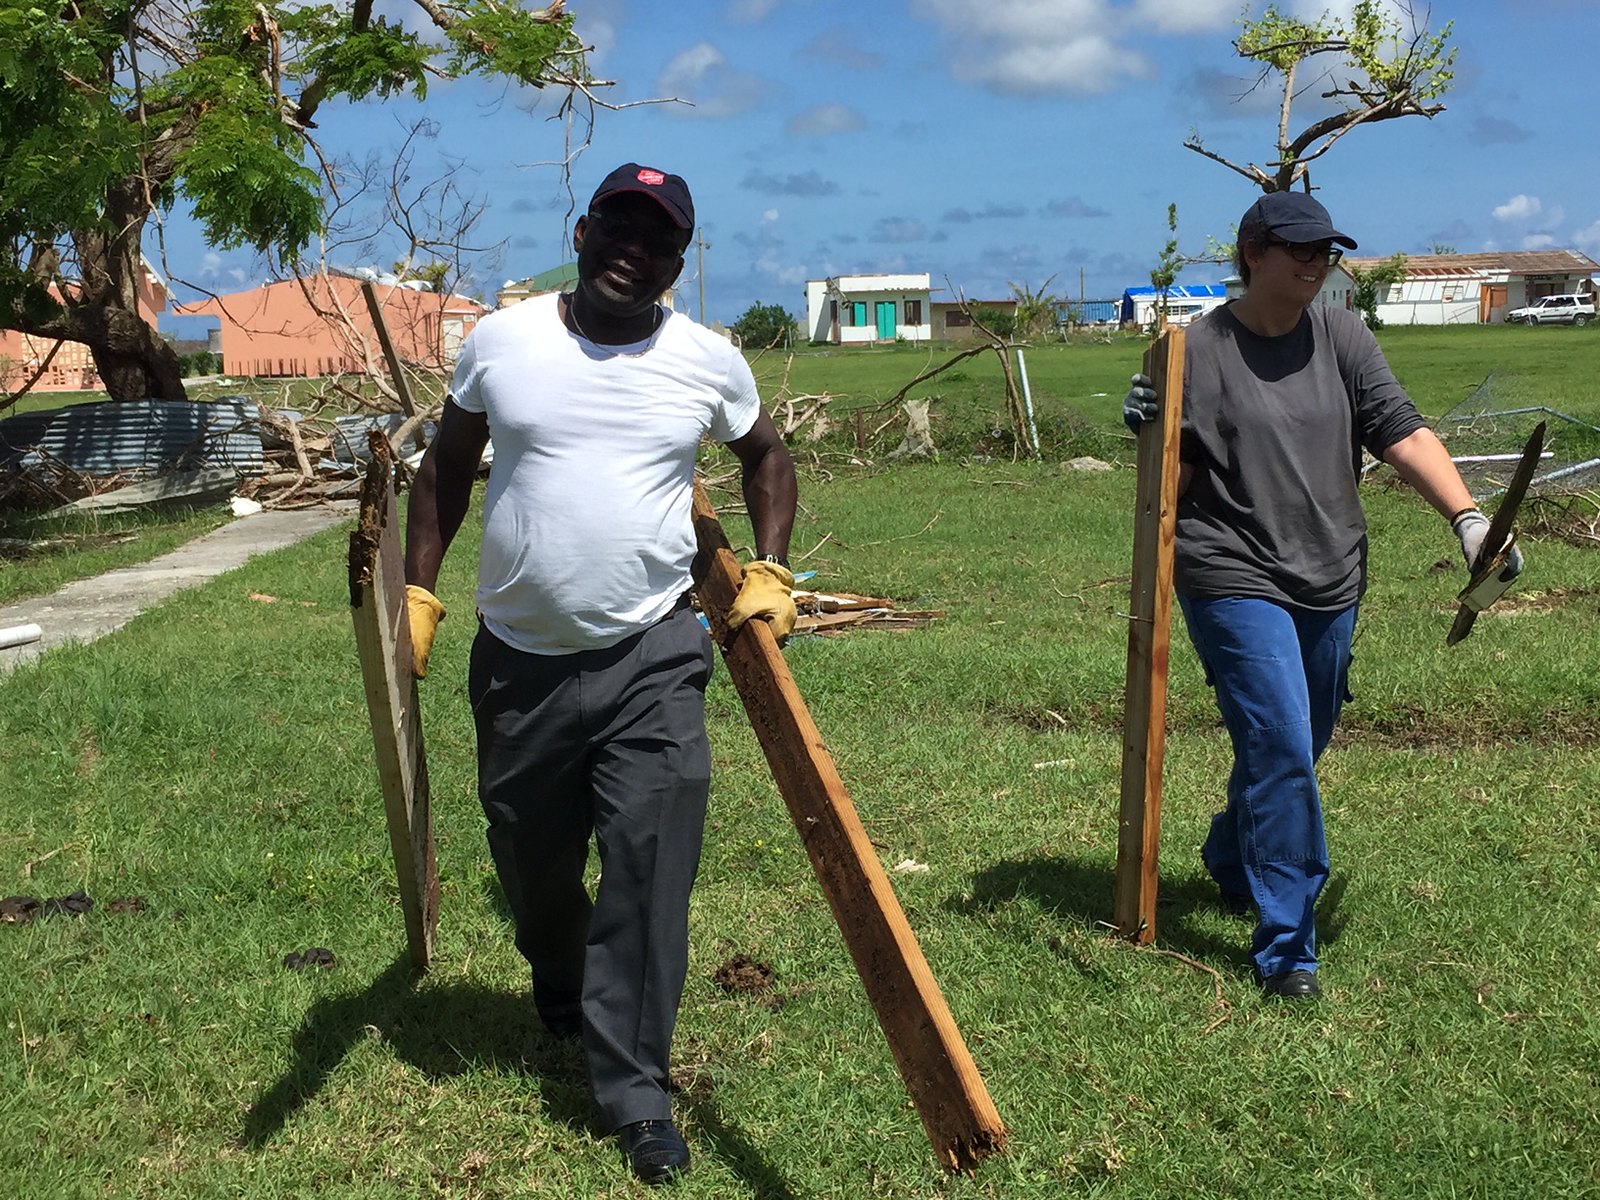 In Barbuda, The Salvation Army provided relief following Storm Irma in which 92 per cent of buildings were damaged or destroyed